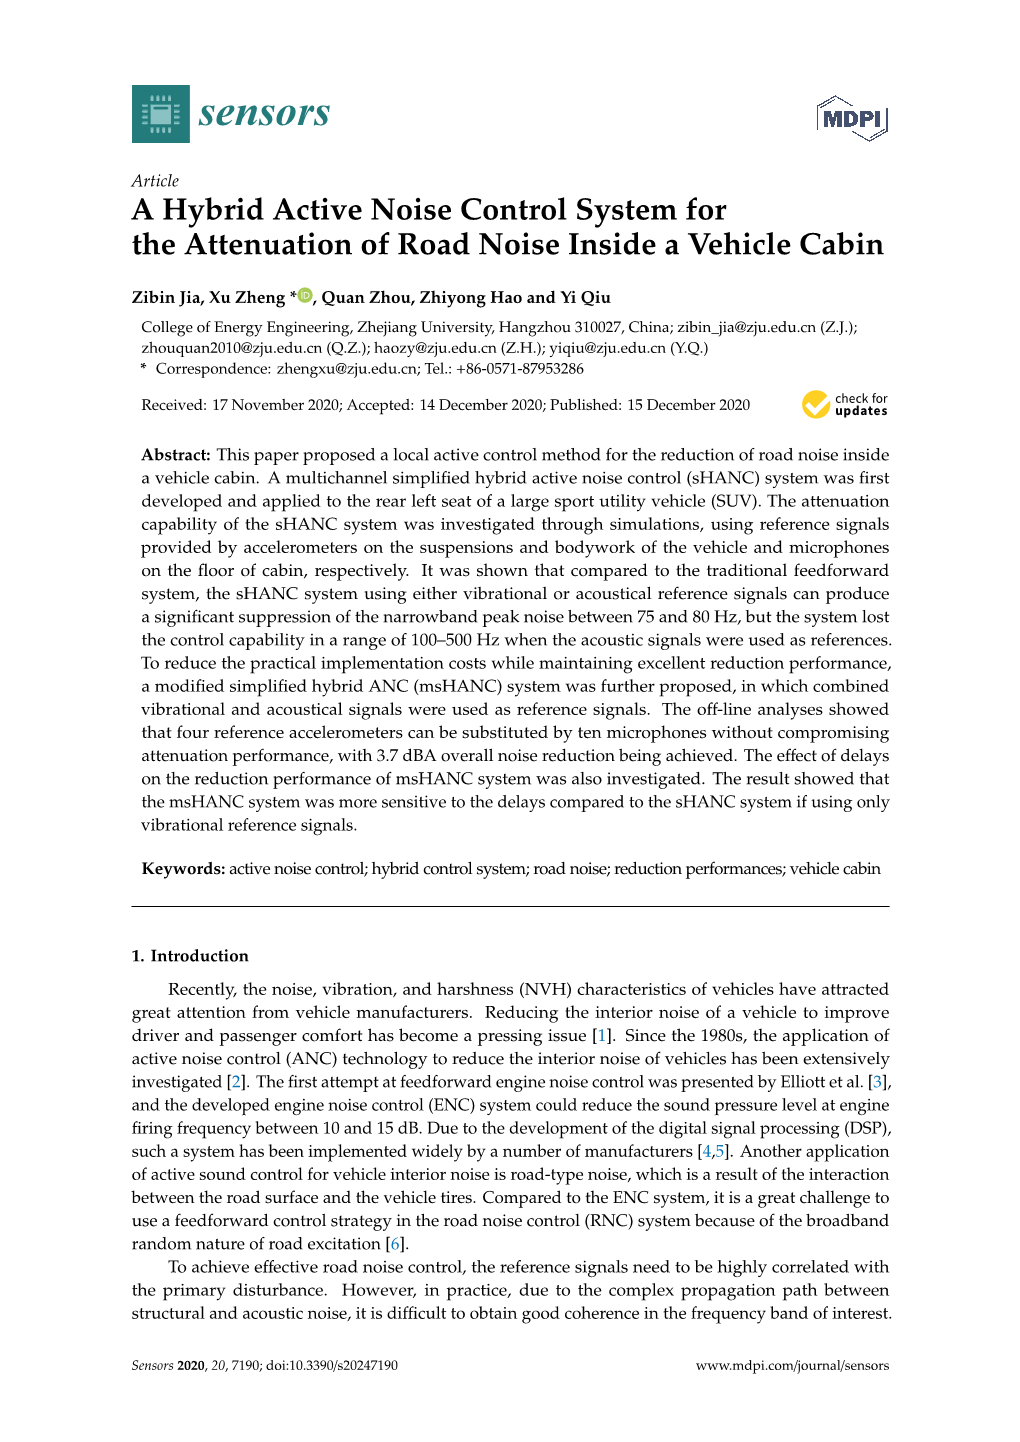 A Hybrid Active Noise Control System for the Attenuation of Road Noise Inside a Vehicle Cabin